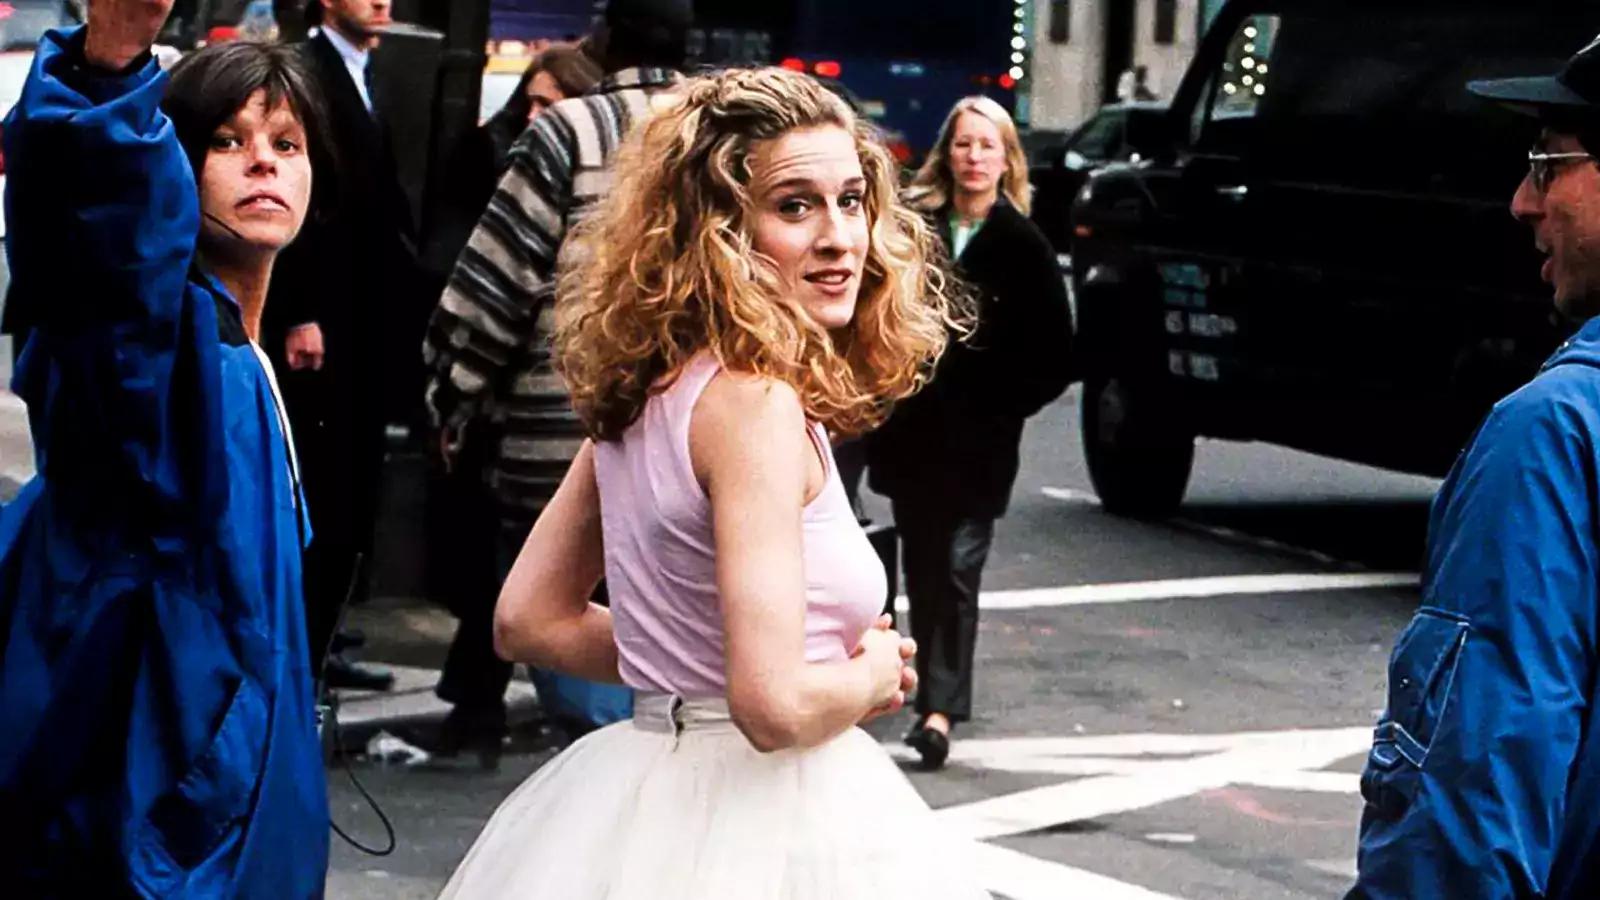 Carrie Bradshaw from Sex and the City